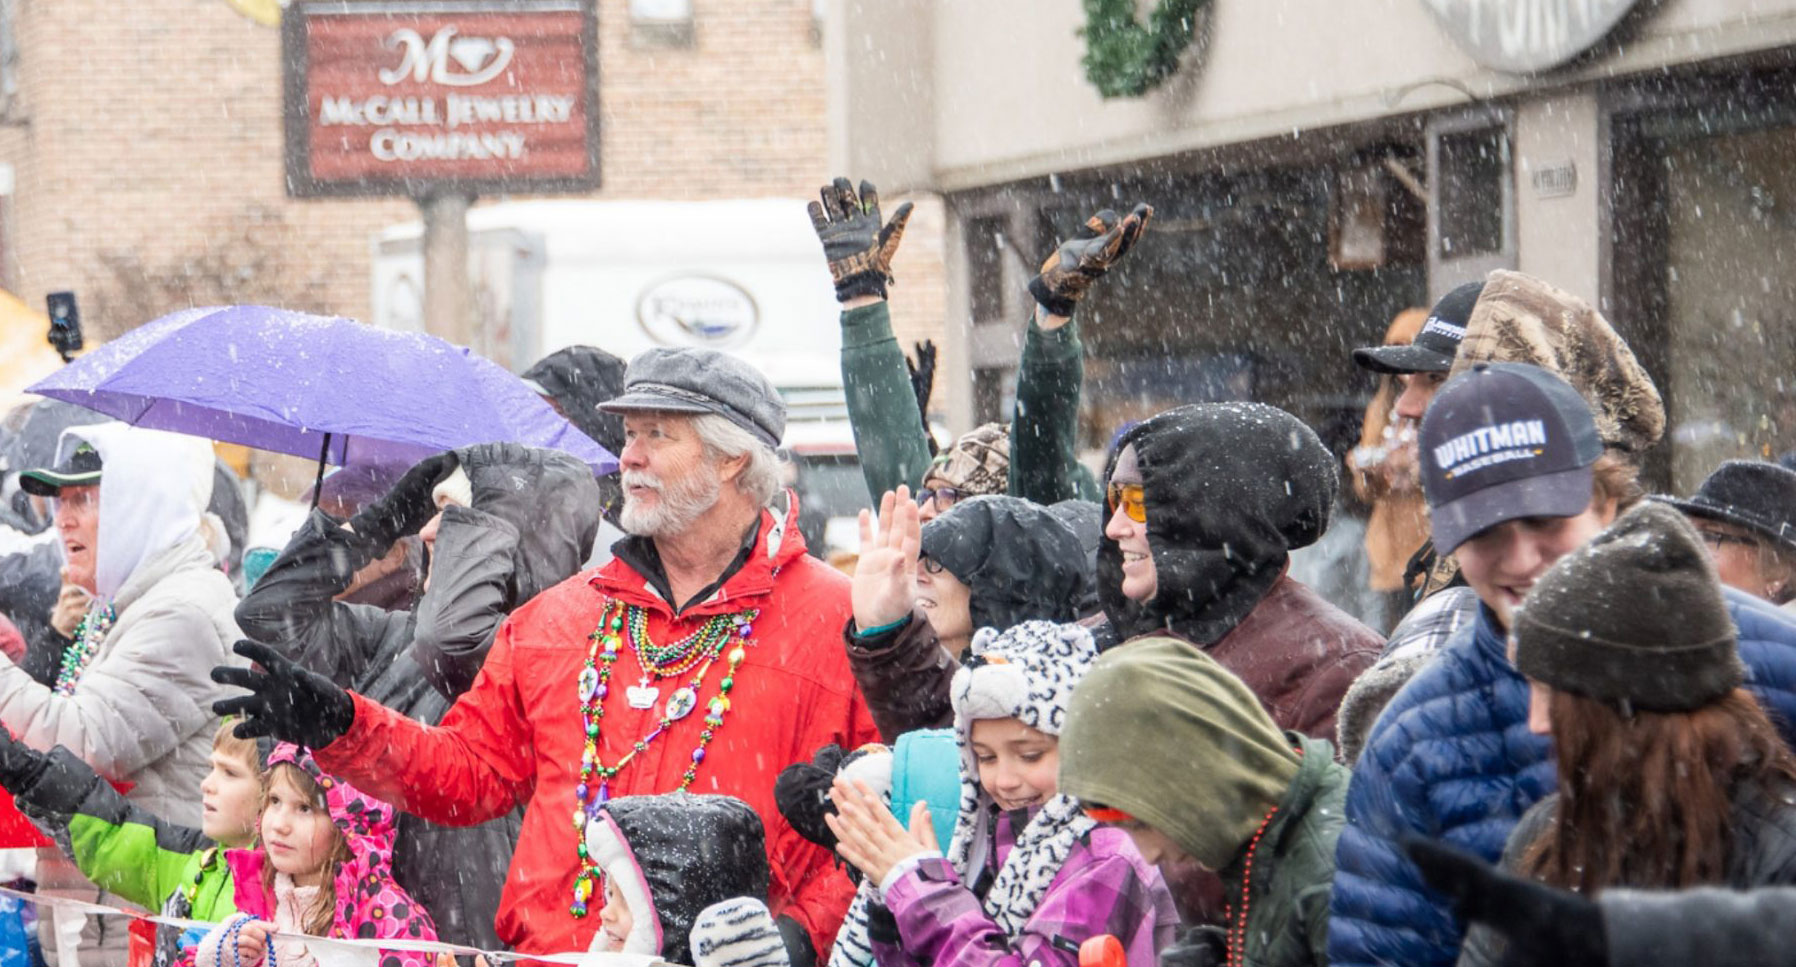 A crowd of people line a street in the snow to watch a parade.